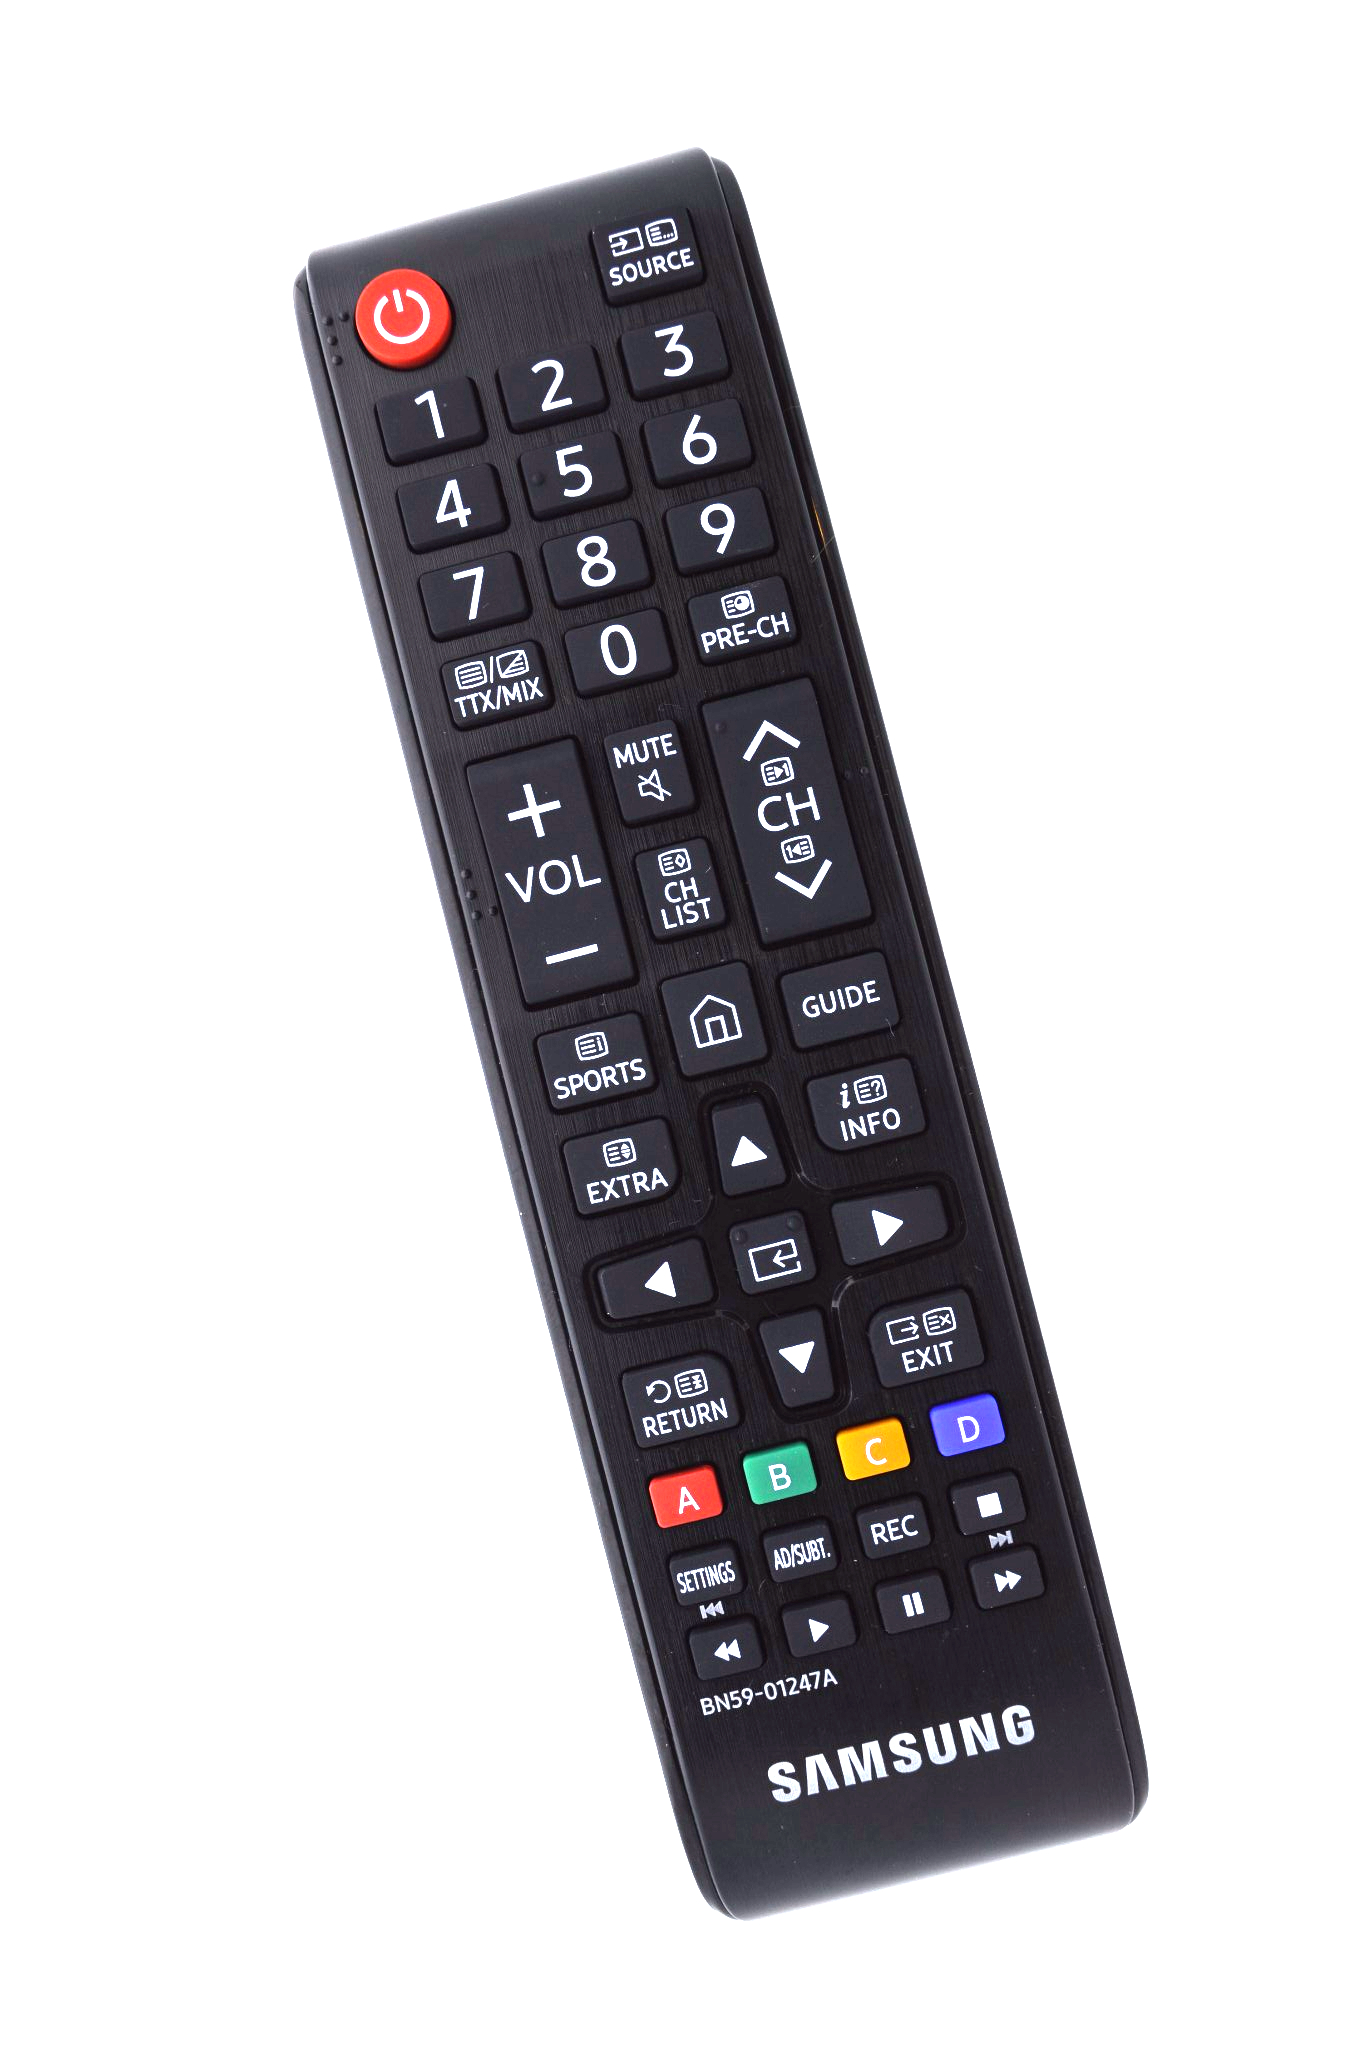 Can Roku Remote Control Samsung TV: How to Control a Samsung TV with Roku Remote?